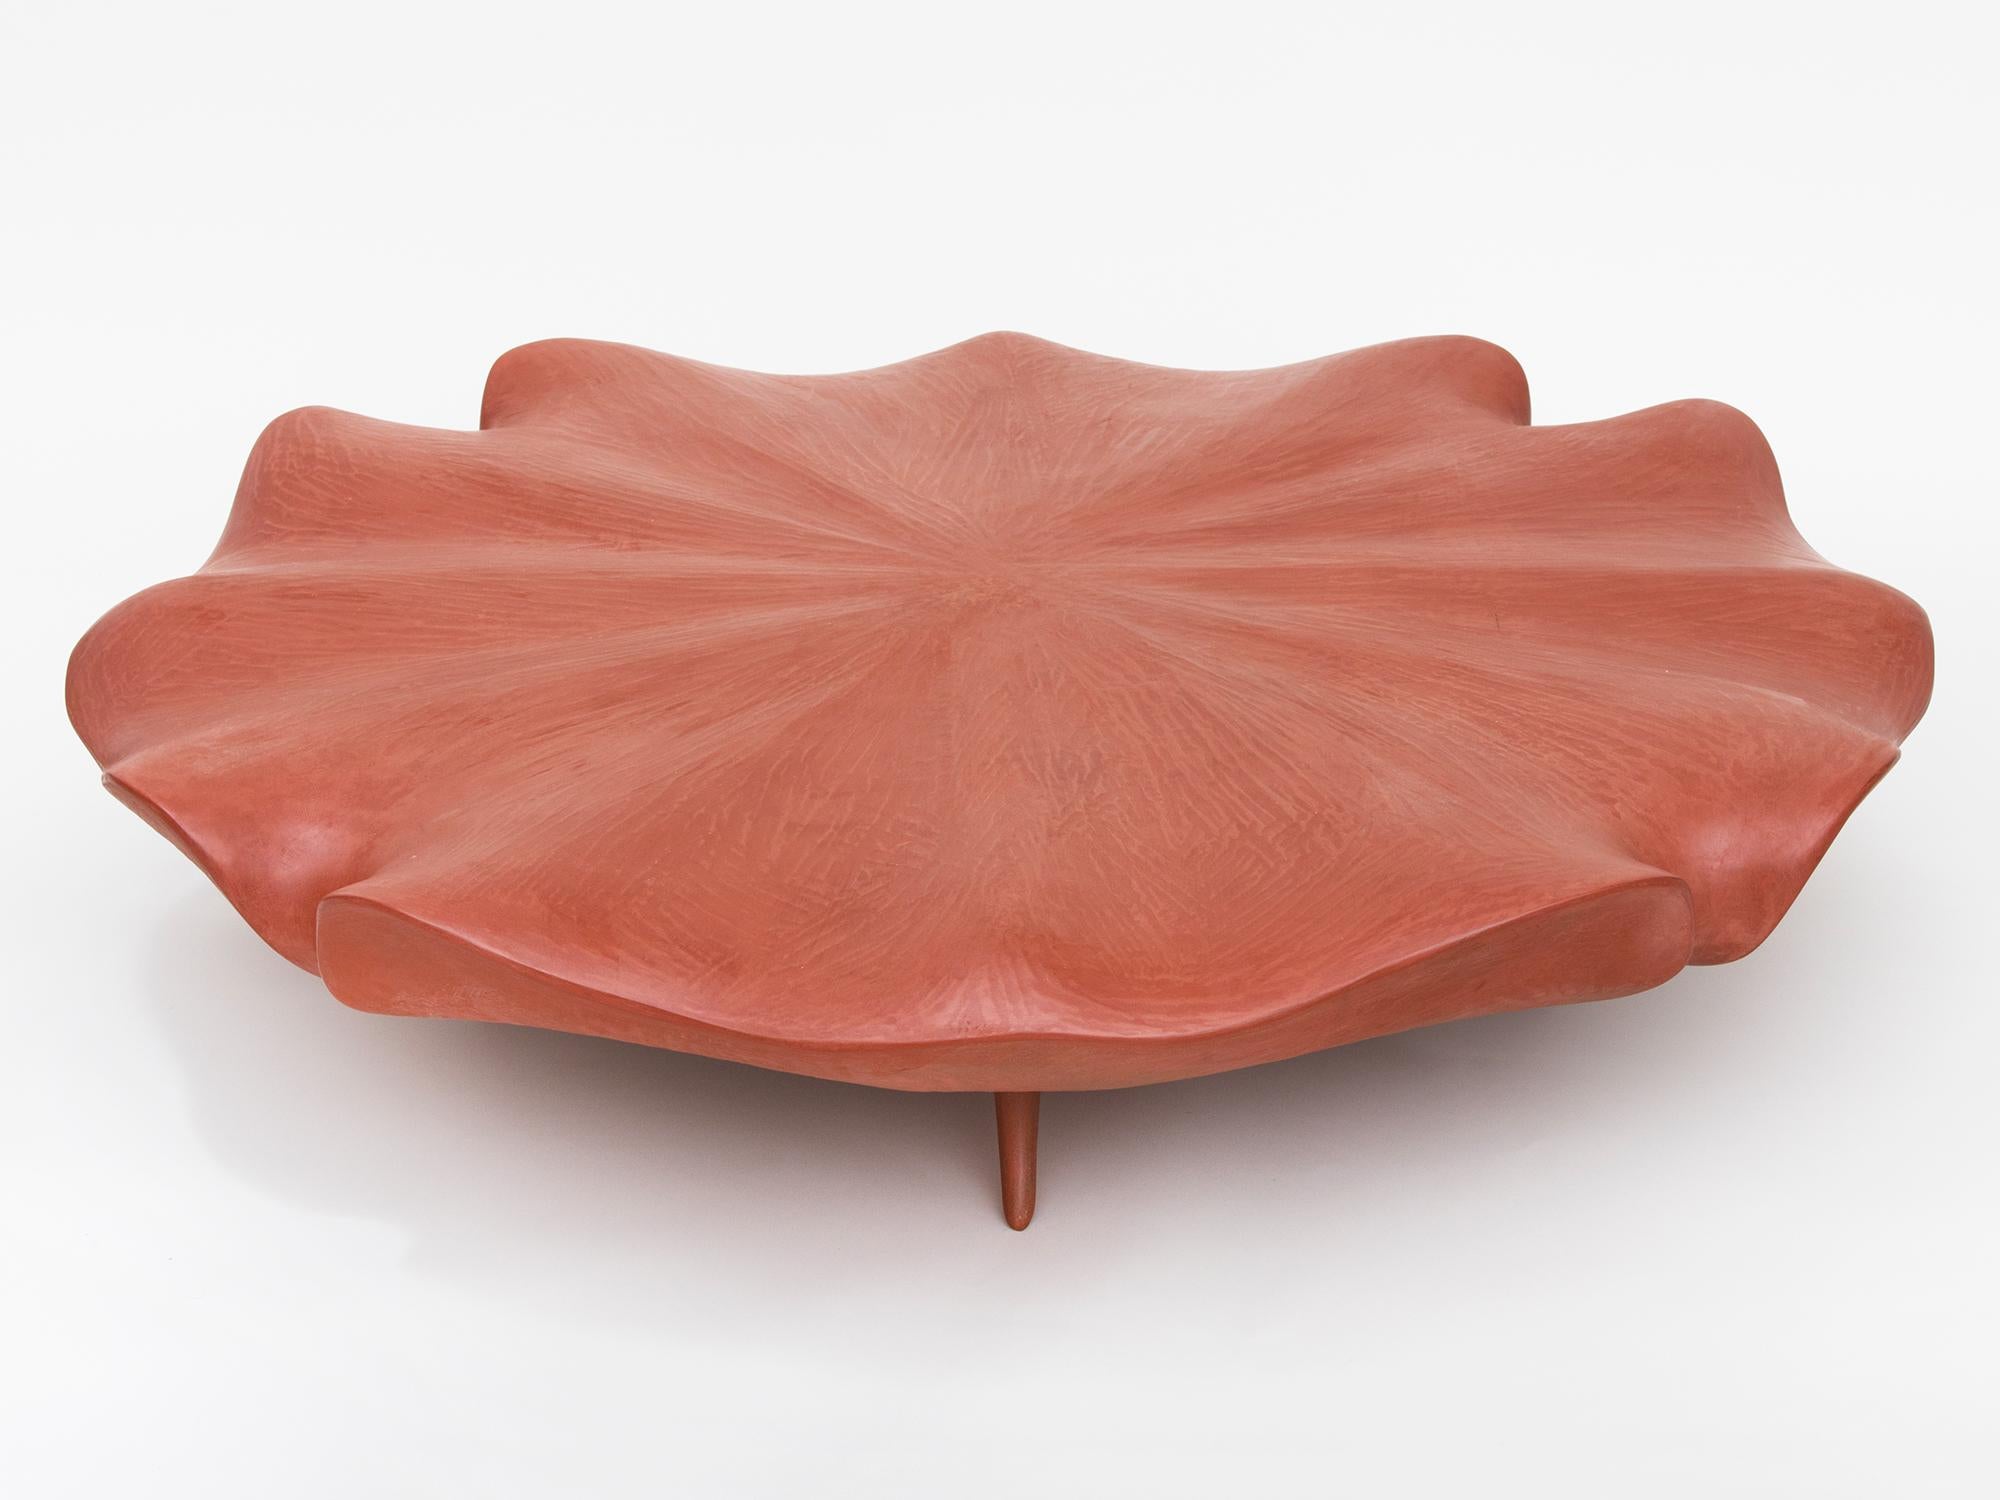 Hand-carved tulipwood and milk paint sculpture and table based on details from traditional Windsor furniture by Hudson Valley-based artist Christopher Kurtz. Named after the carving process called “saddling”, which is the hollowing out of the